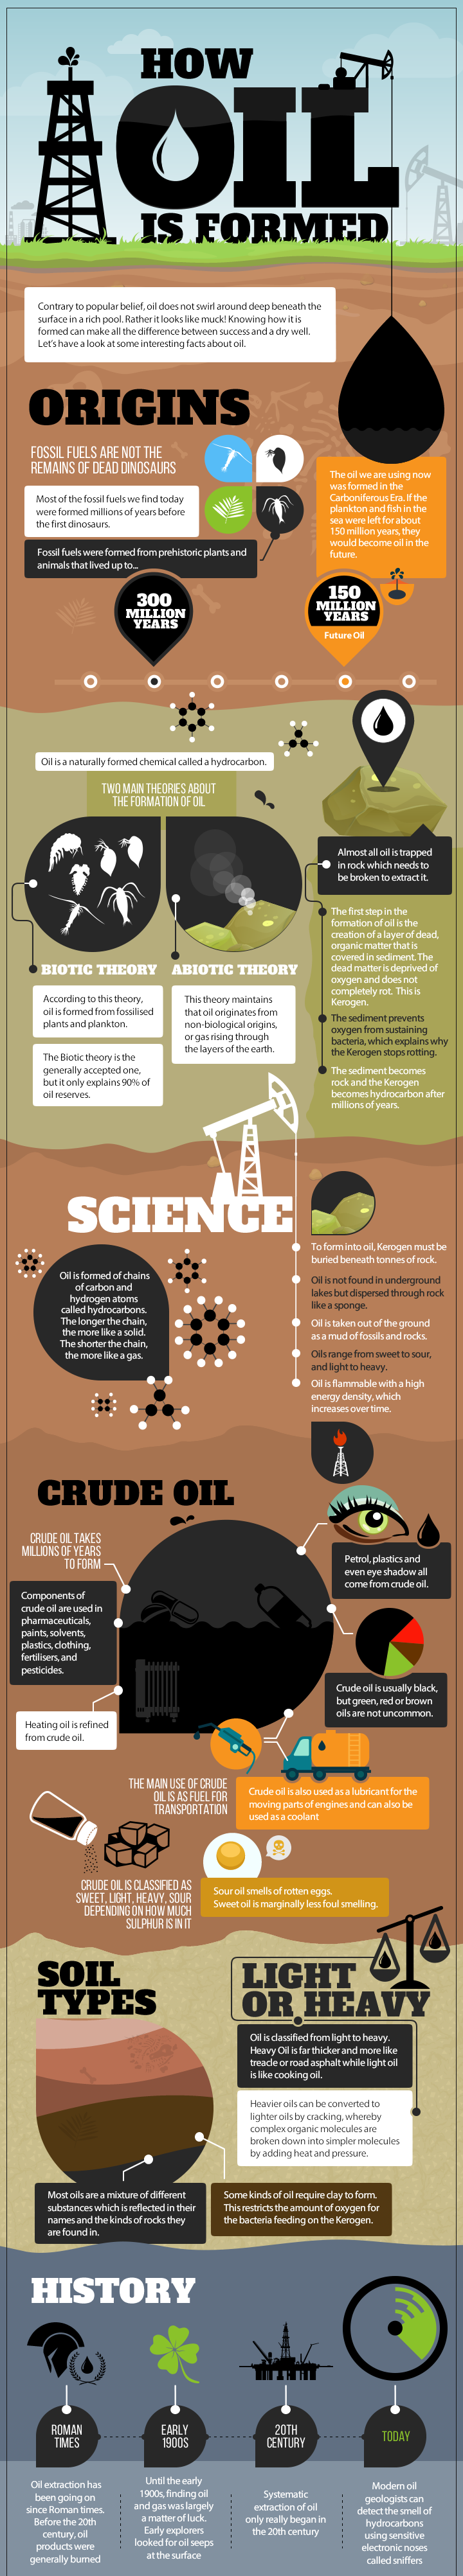 Infographic: How Oil is Formed